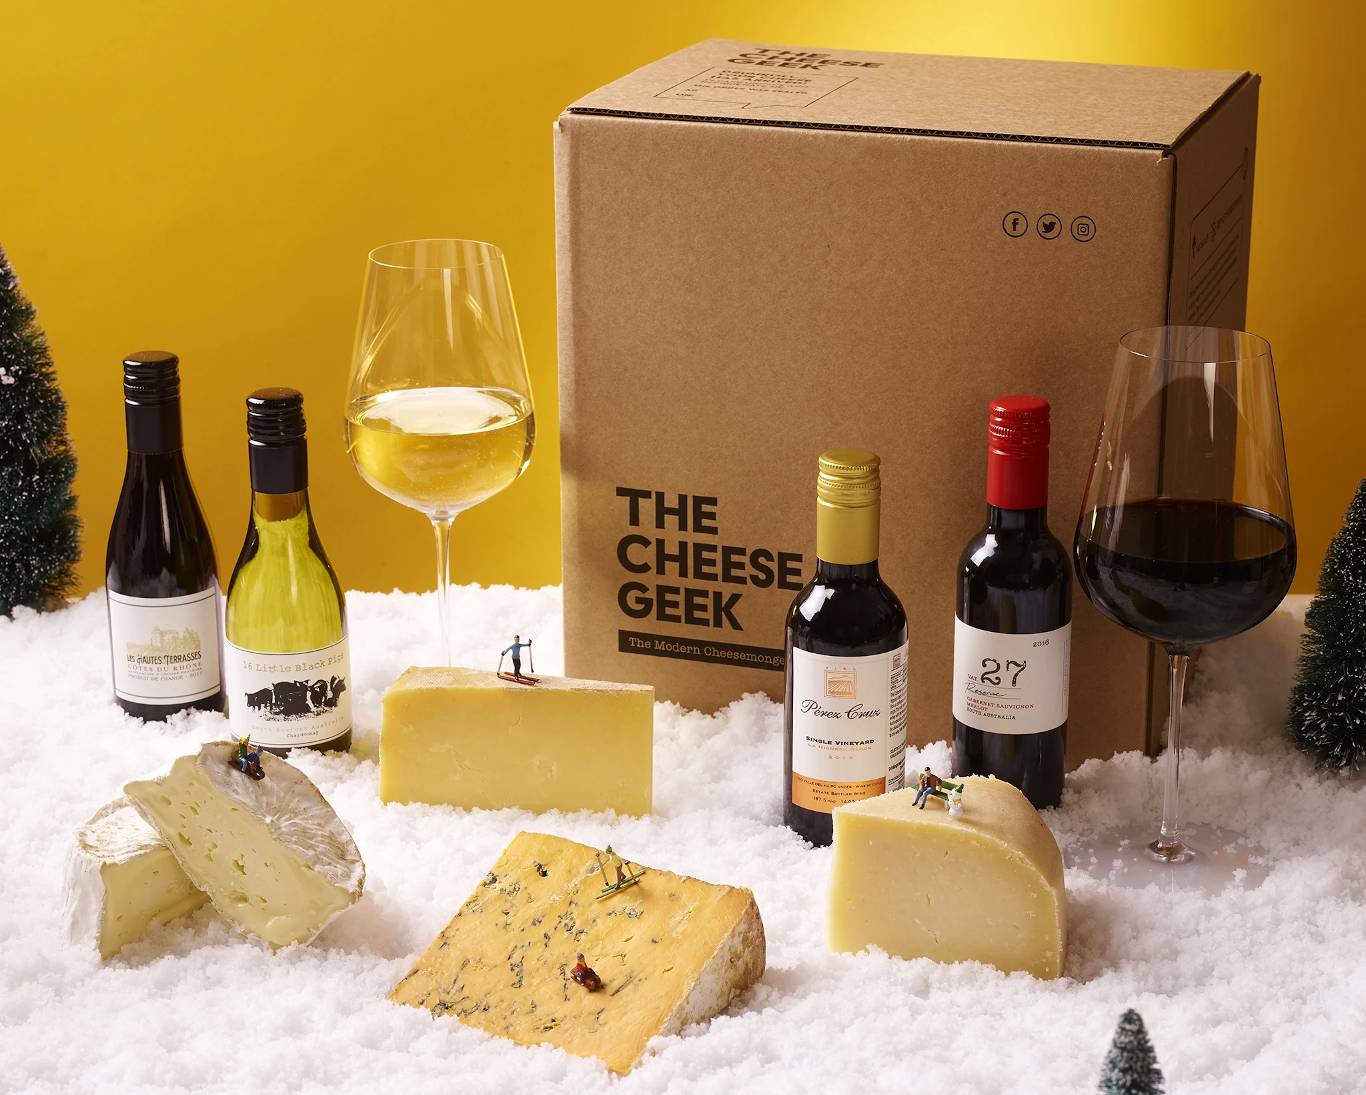 Wine bottles and various cheeses with cheese geek box